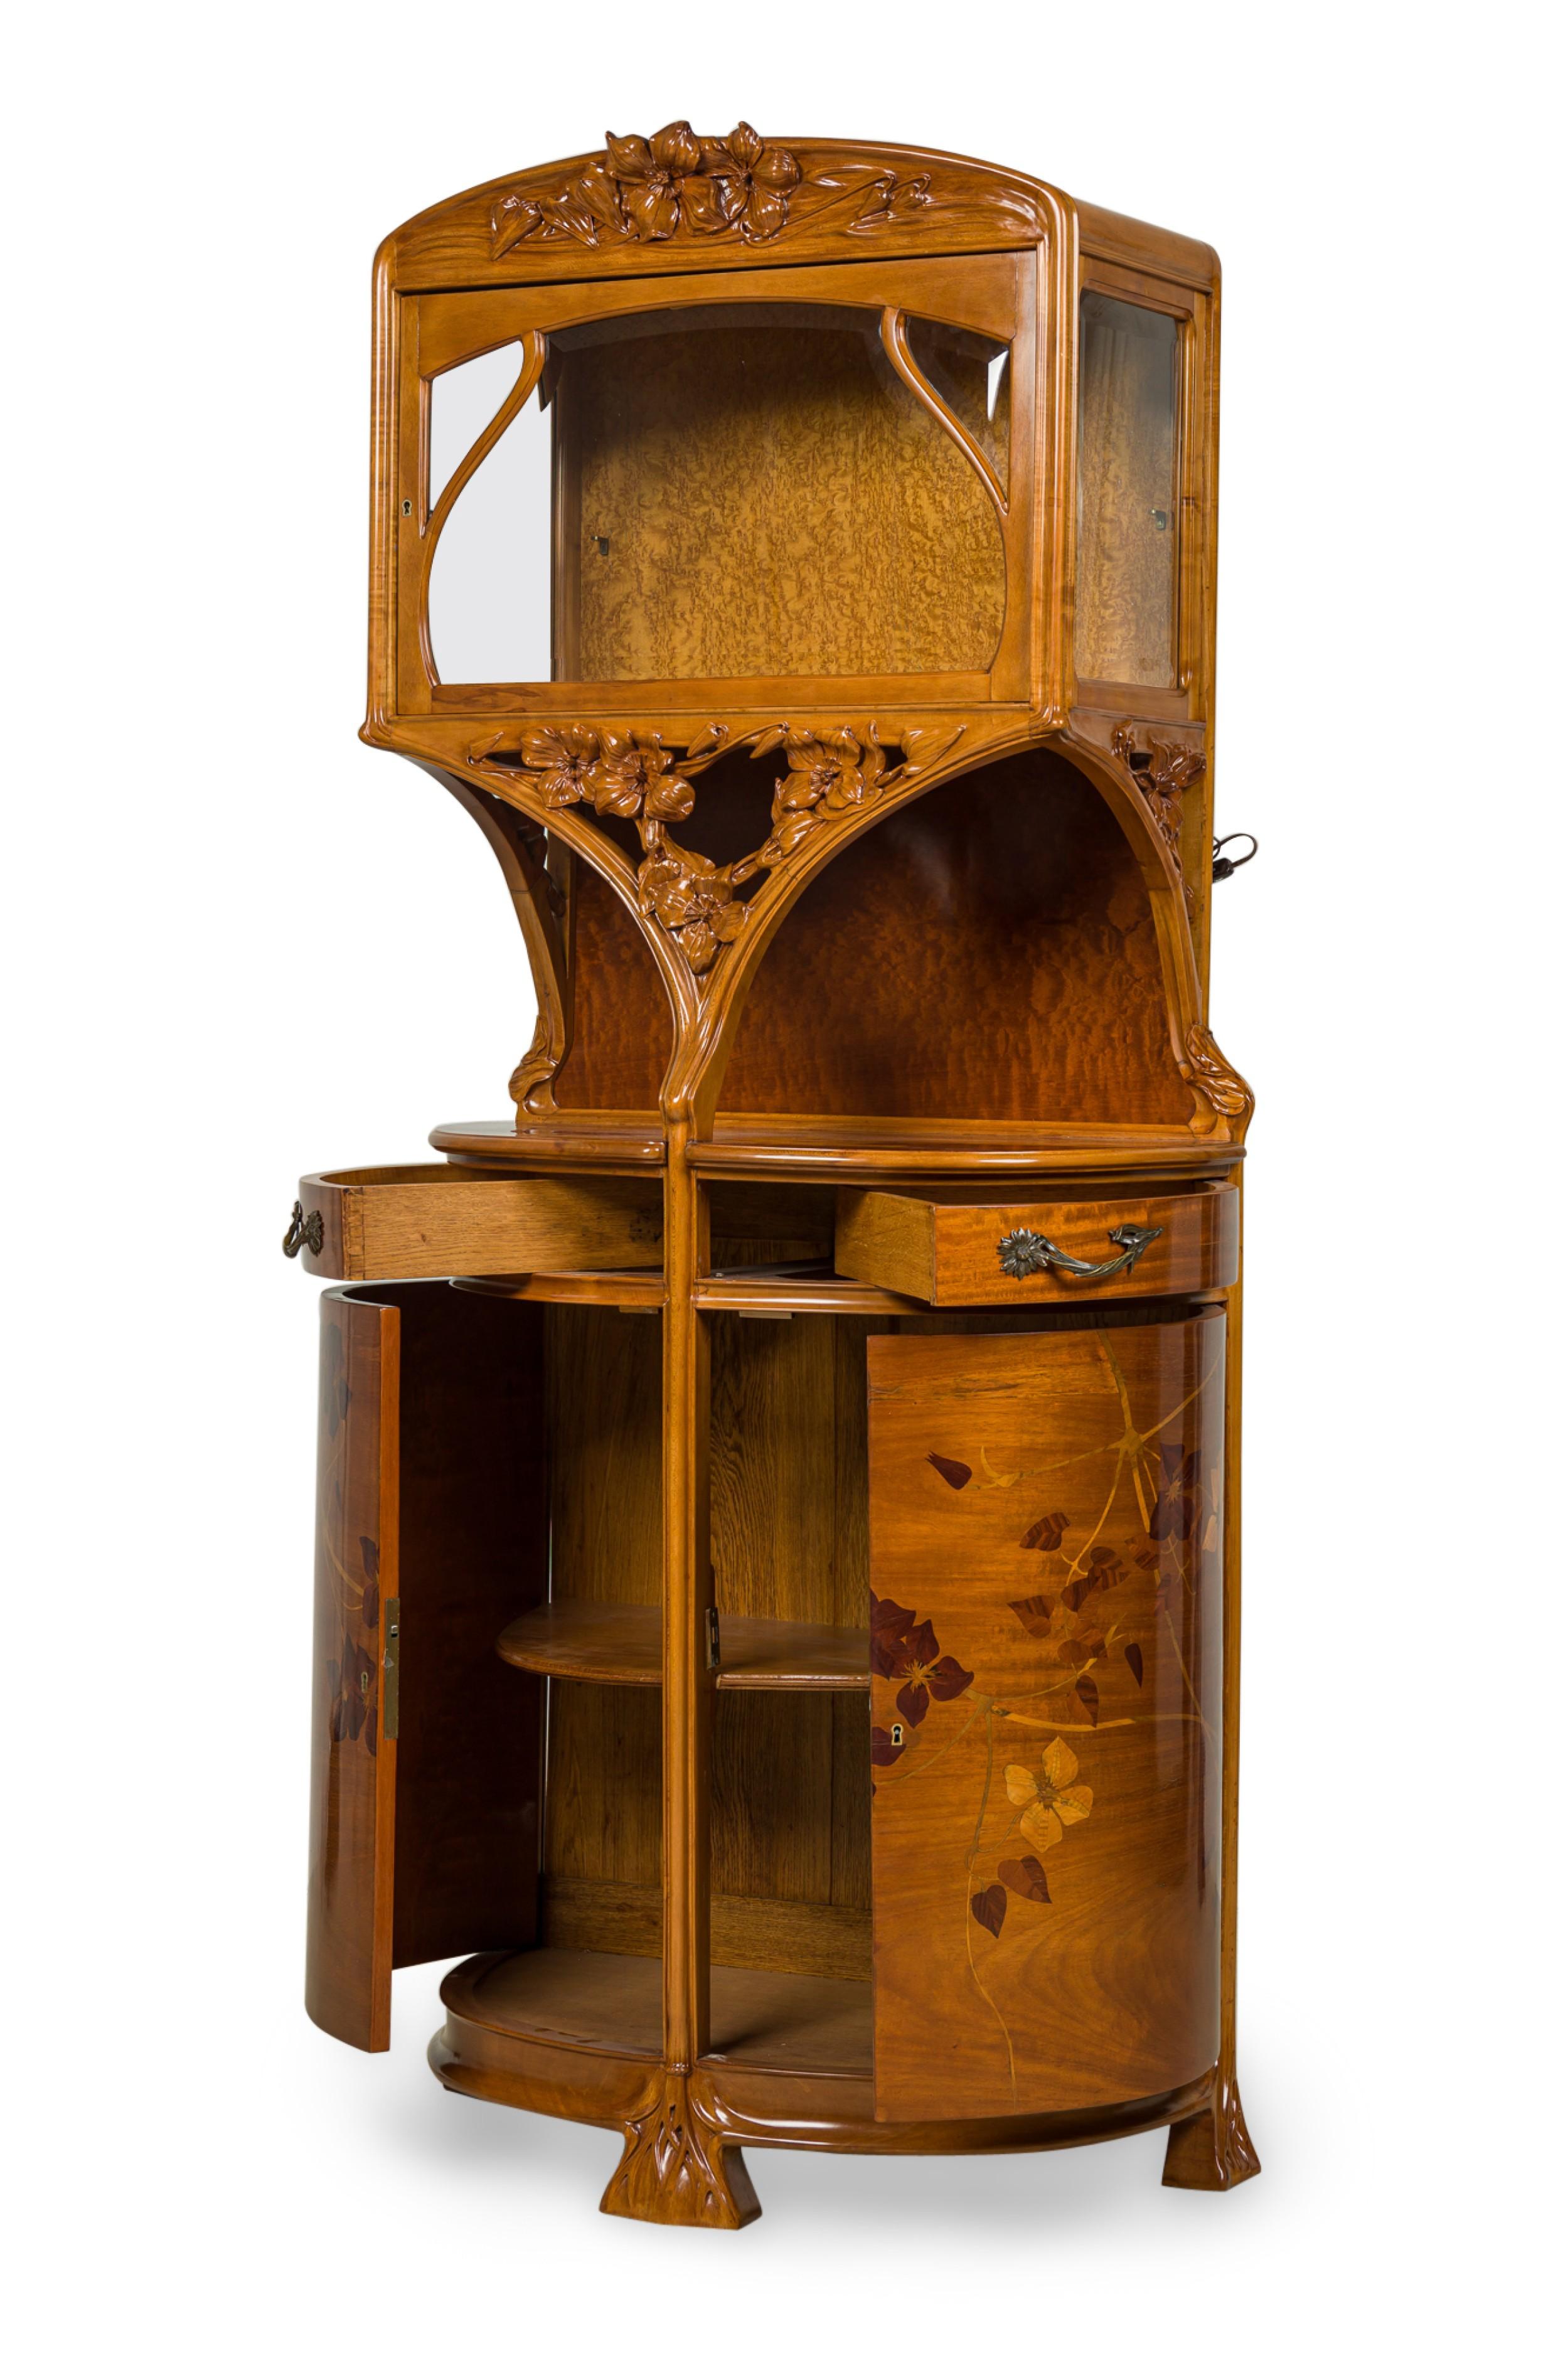 Wood Camille Gauthier French Art Nouveau Floral Marquetry Display Cabinet / Vitrine For Sale